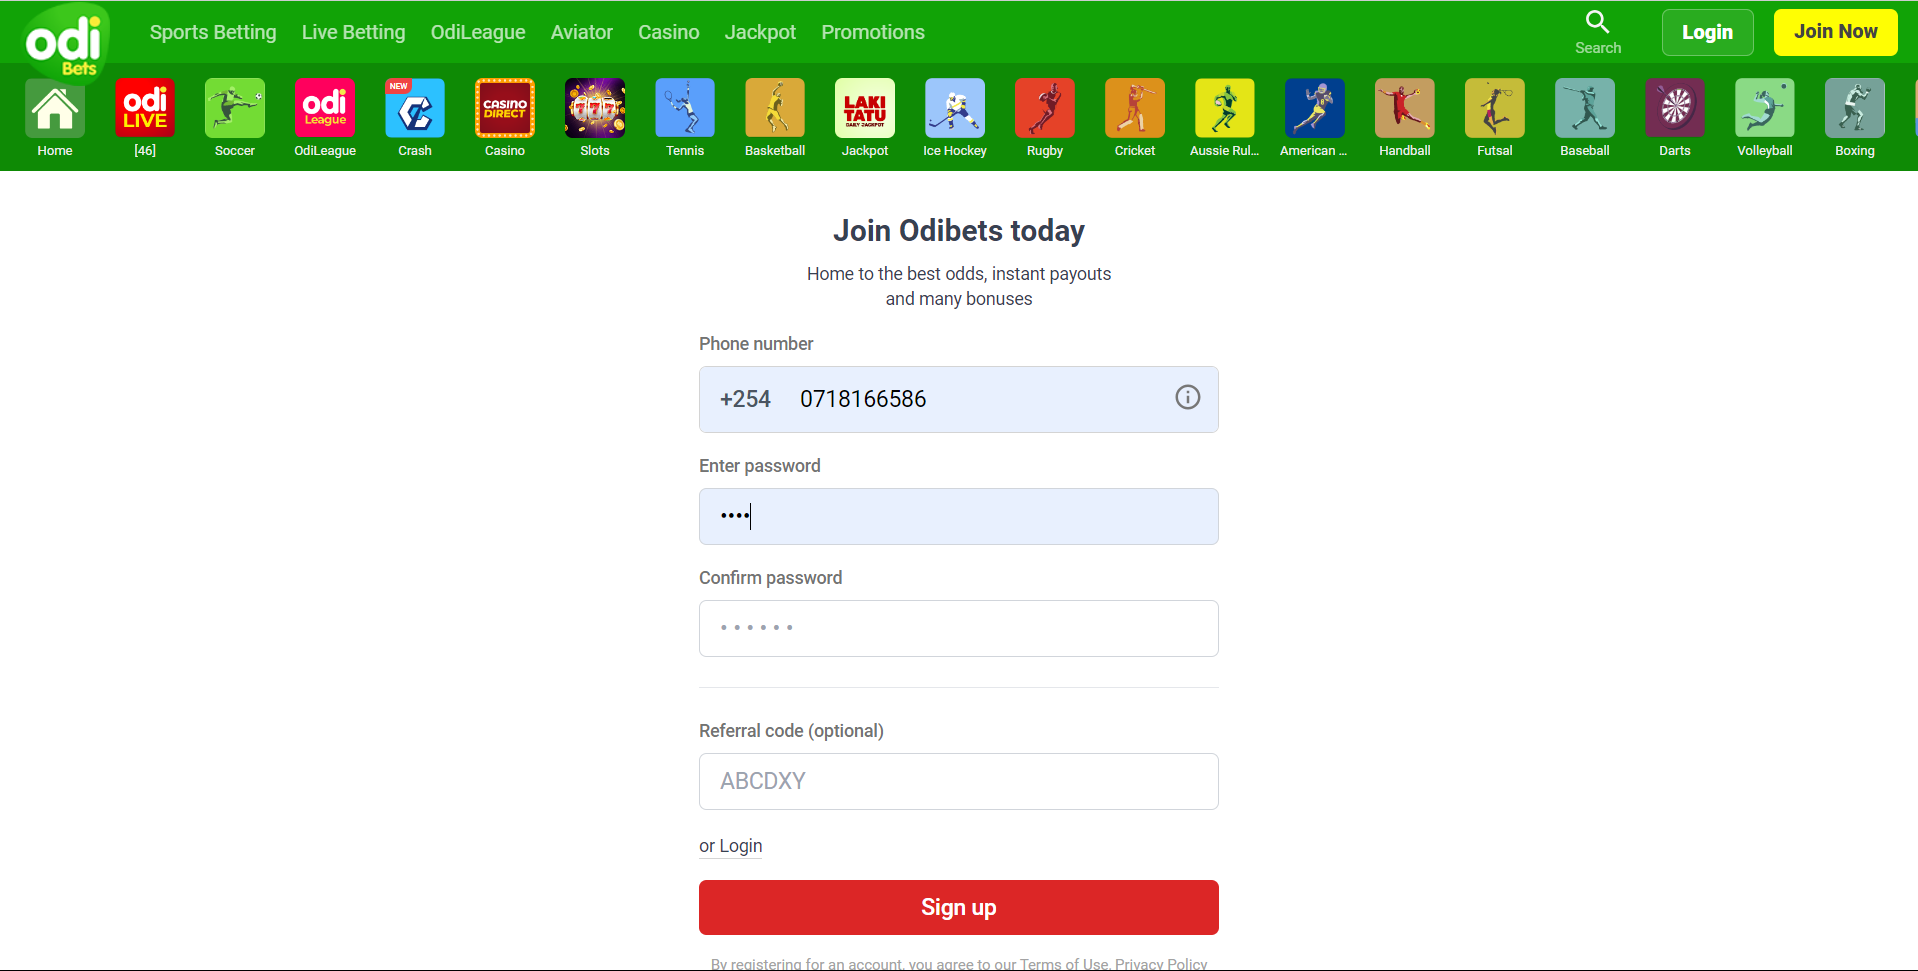 Images showing the registration in Odibets Aviator game